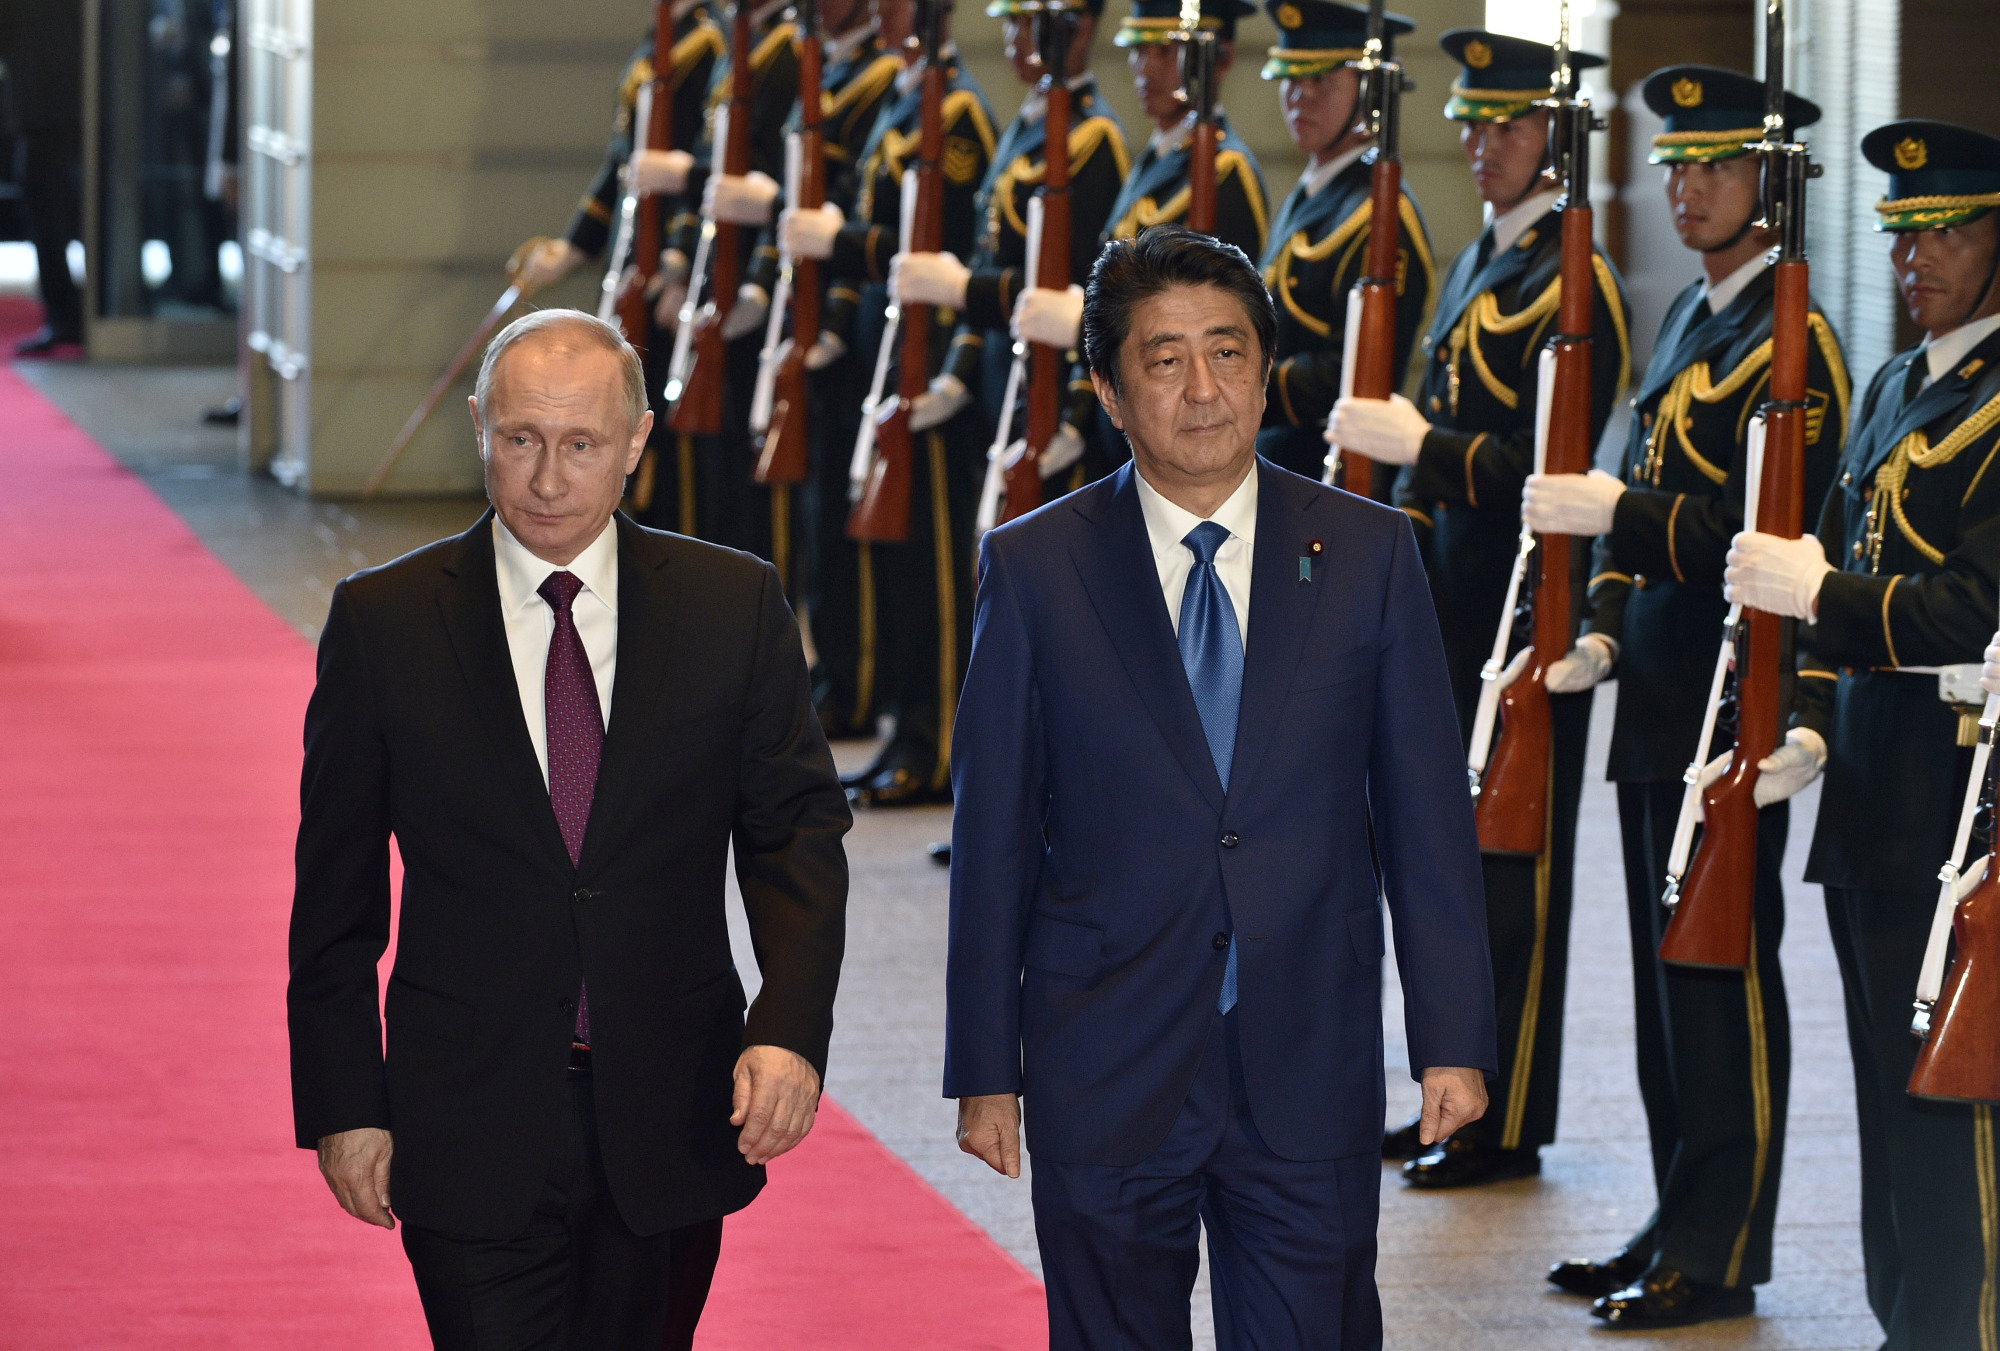 Abe-Putin summit eyed for April 27-28 in Russia: sources - The Japan Times